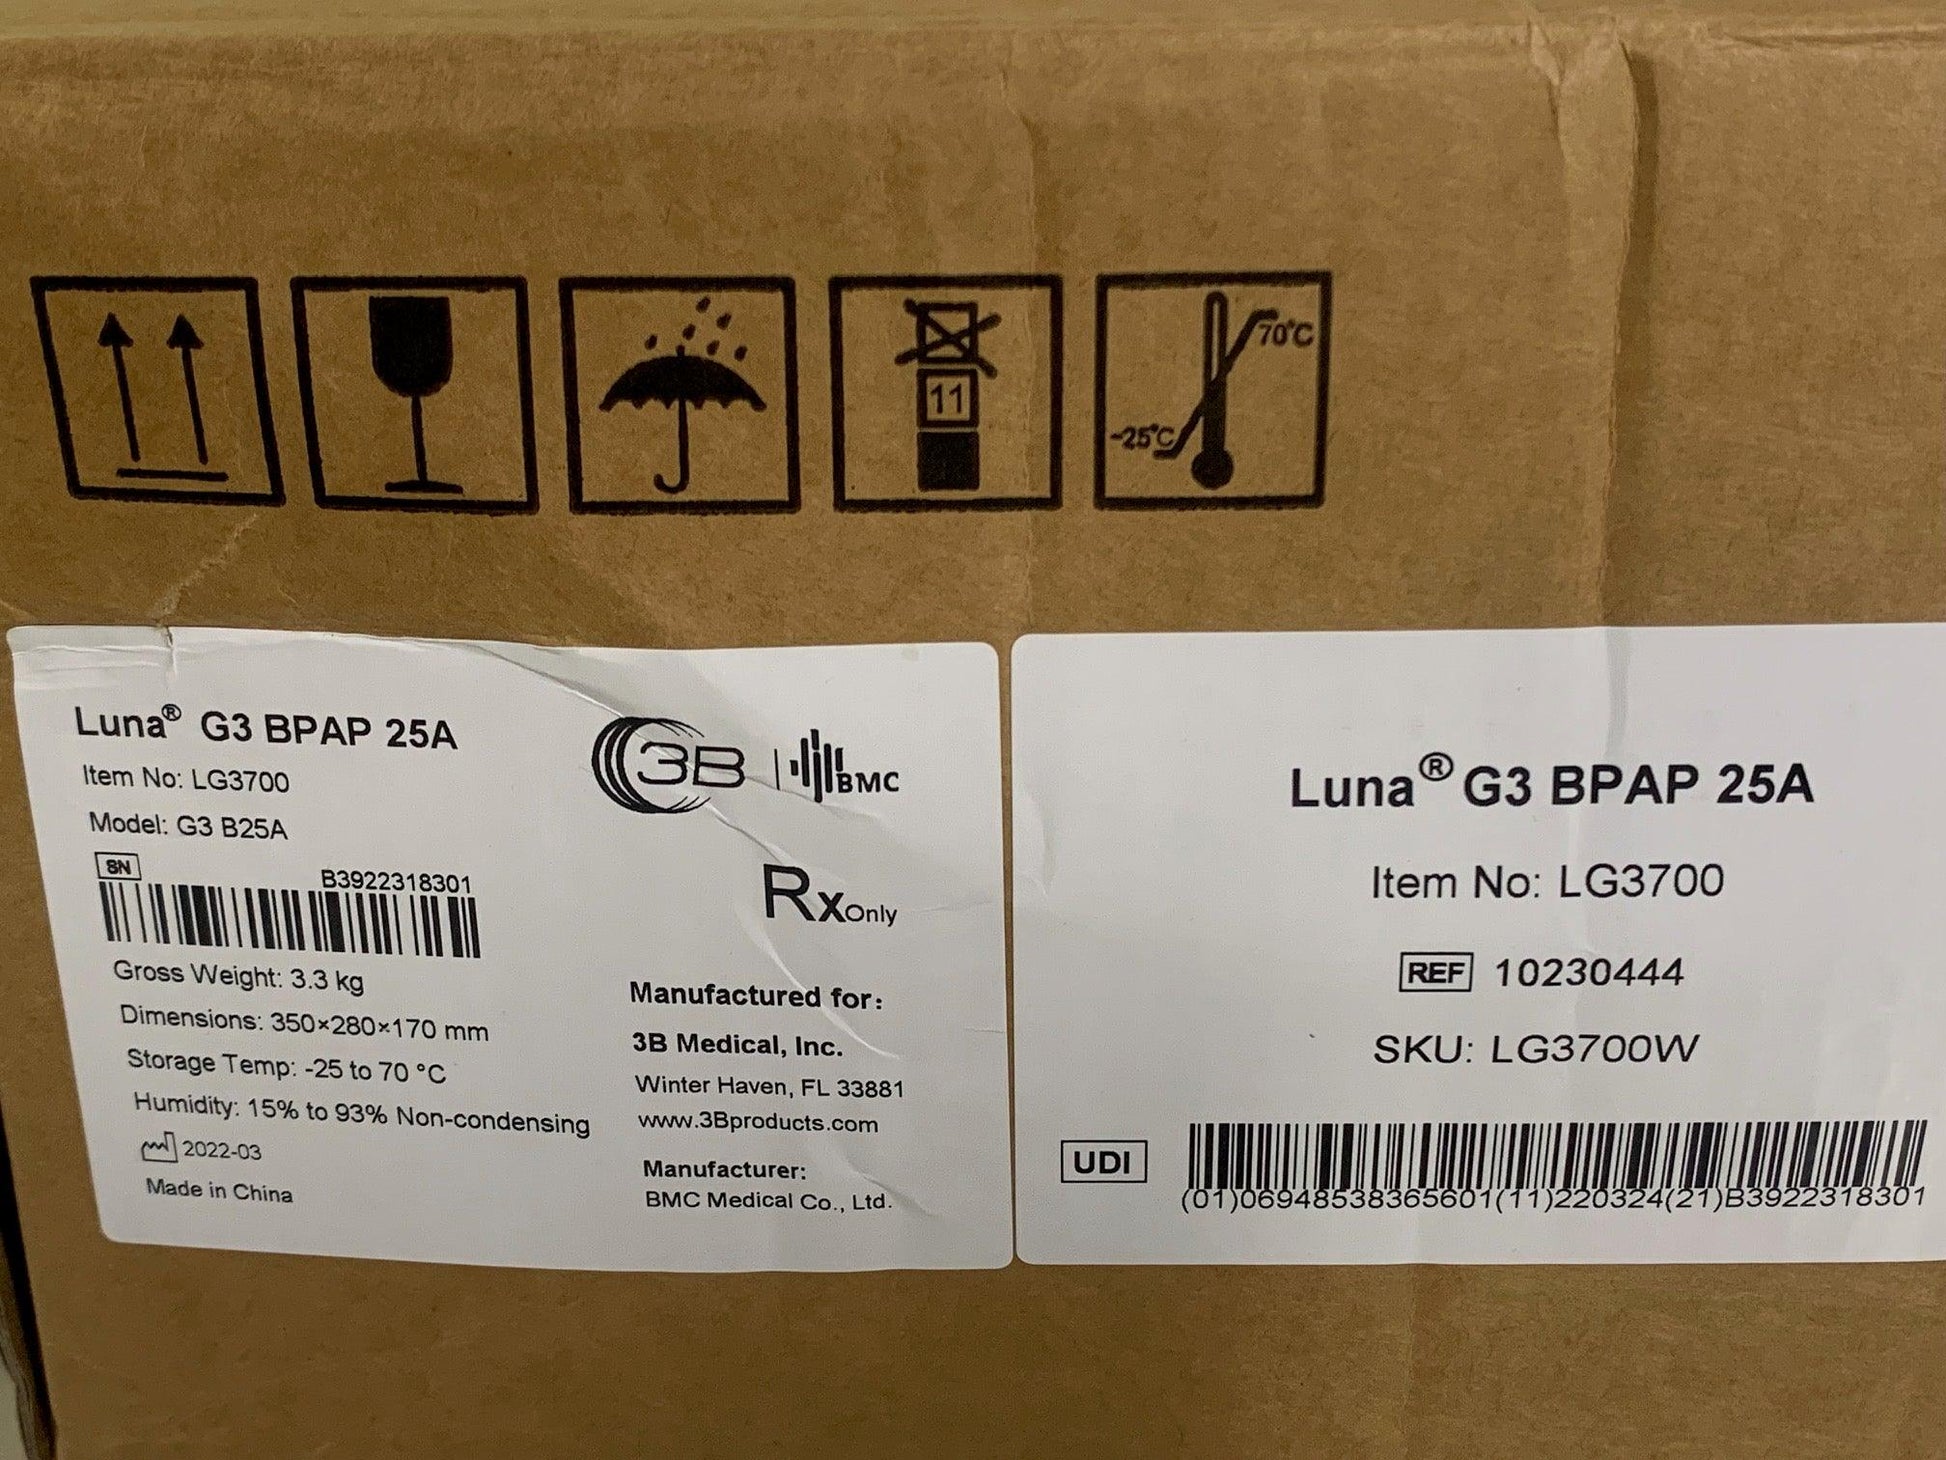 NEW Luna G3 BiPAP 25A Machine Auto-BiPAP with Heated Humidifier - MBR Medicals